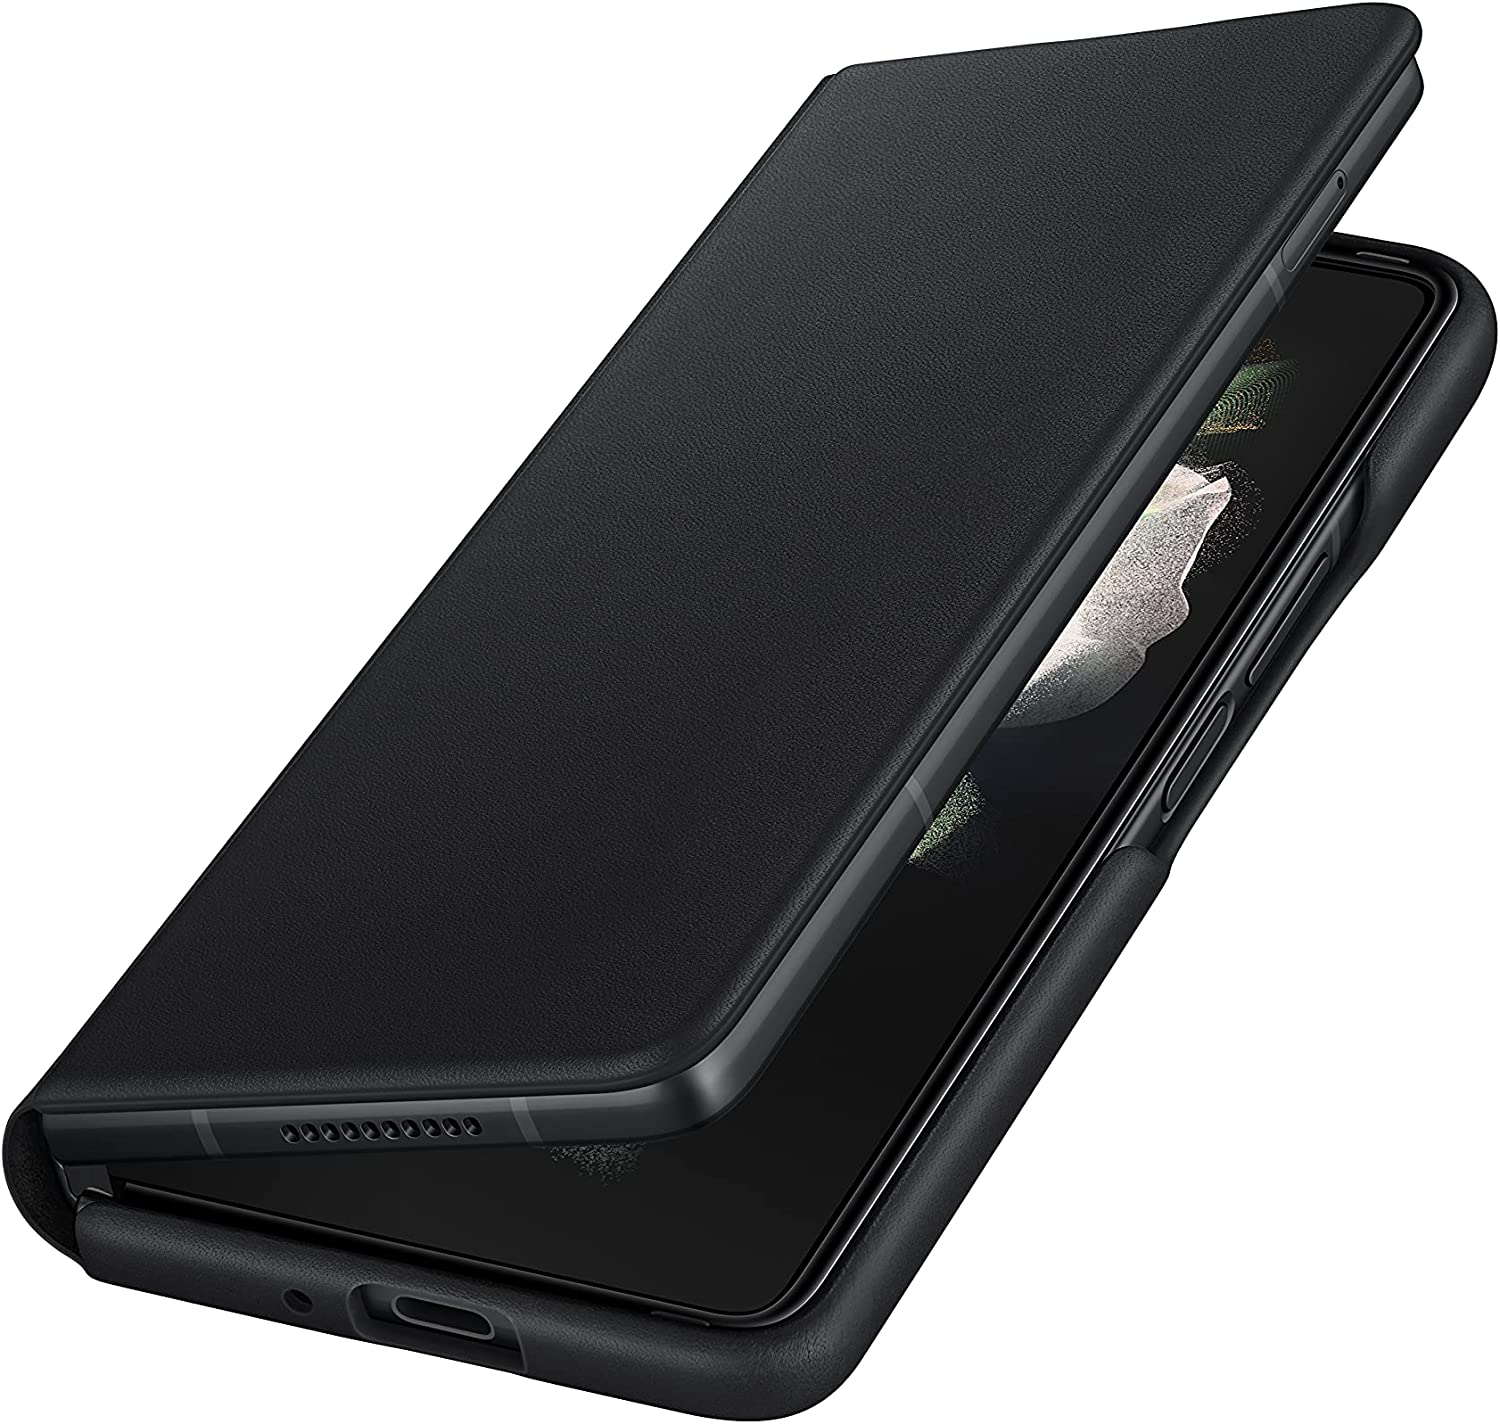 Samsung Galaxy Z Fold 3 5G Leather Protective Cover Case w/Stand - Black (New)